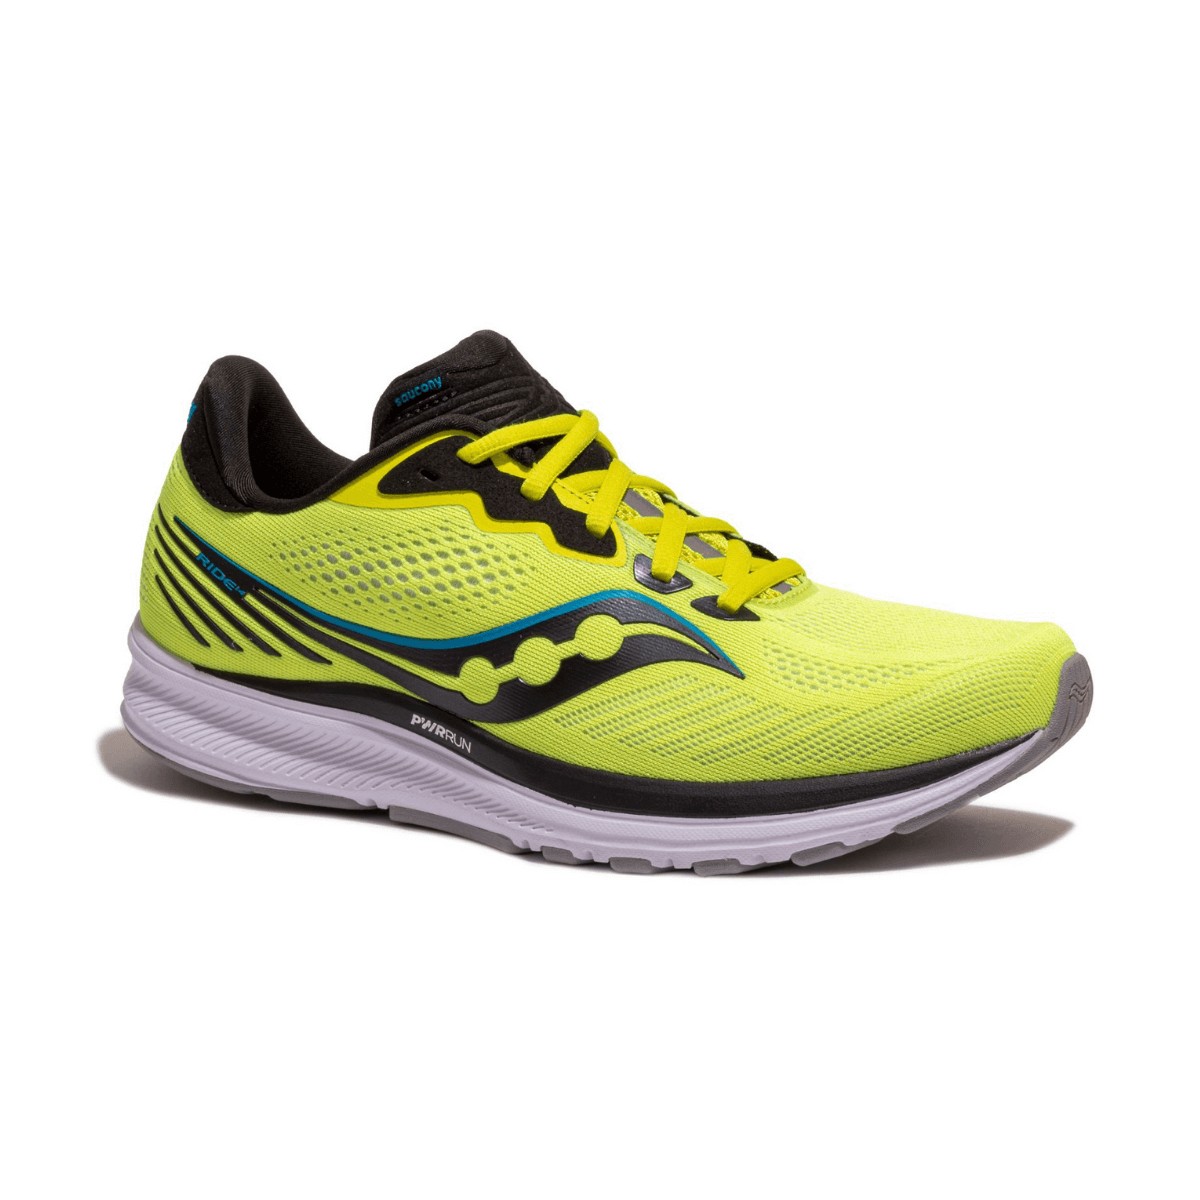 Saucony Ride 14 Shoes Yellow Black SS21